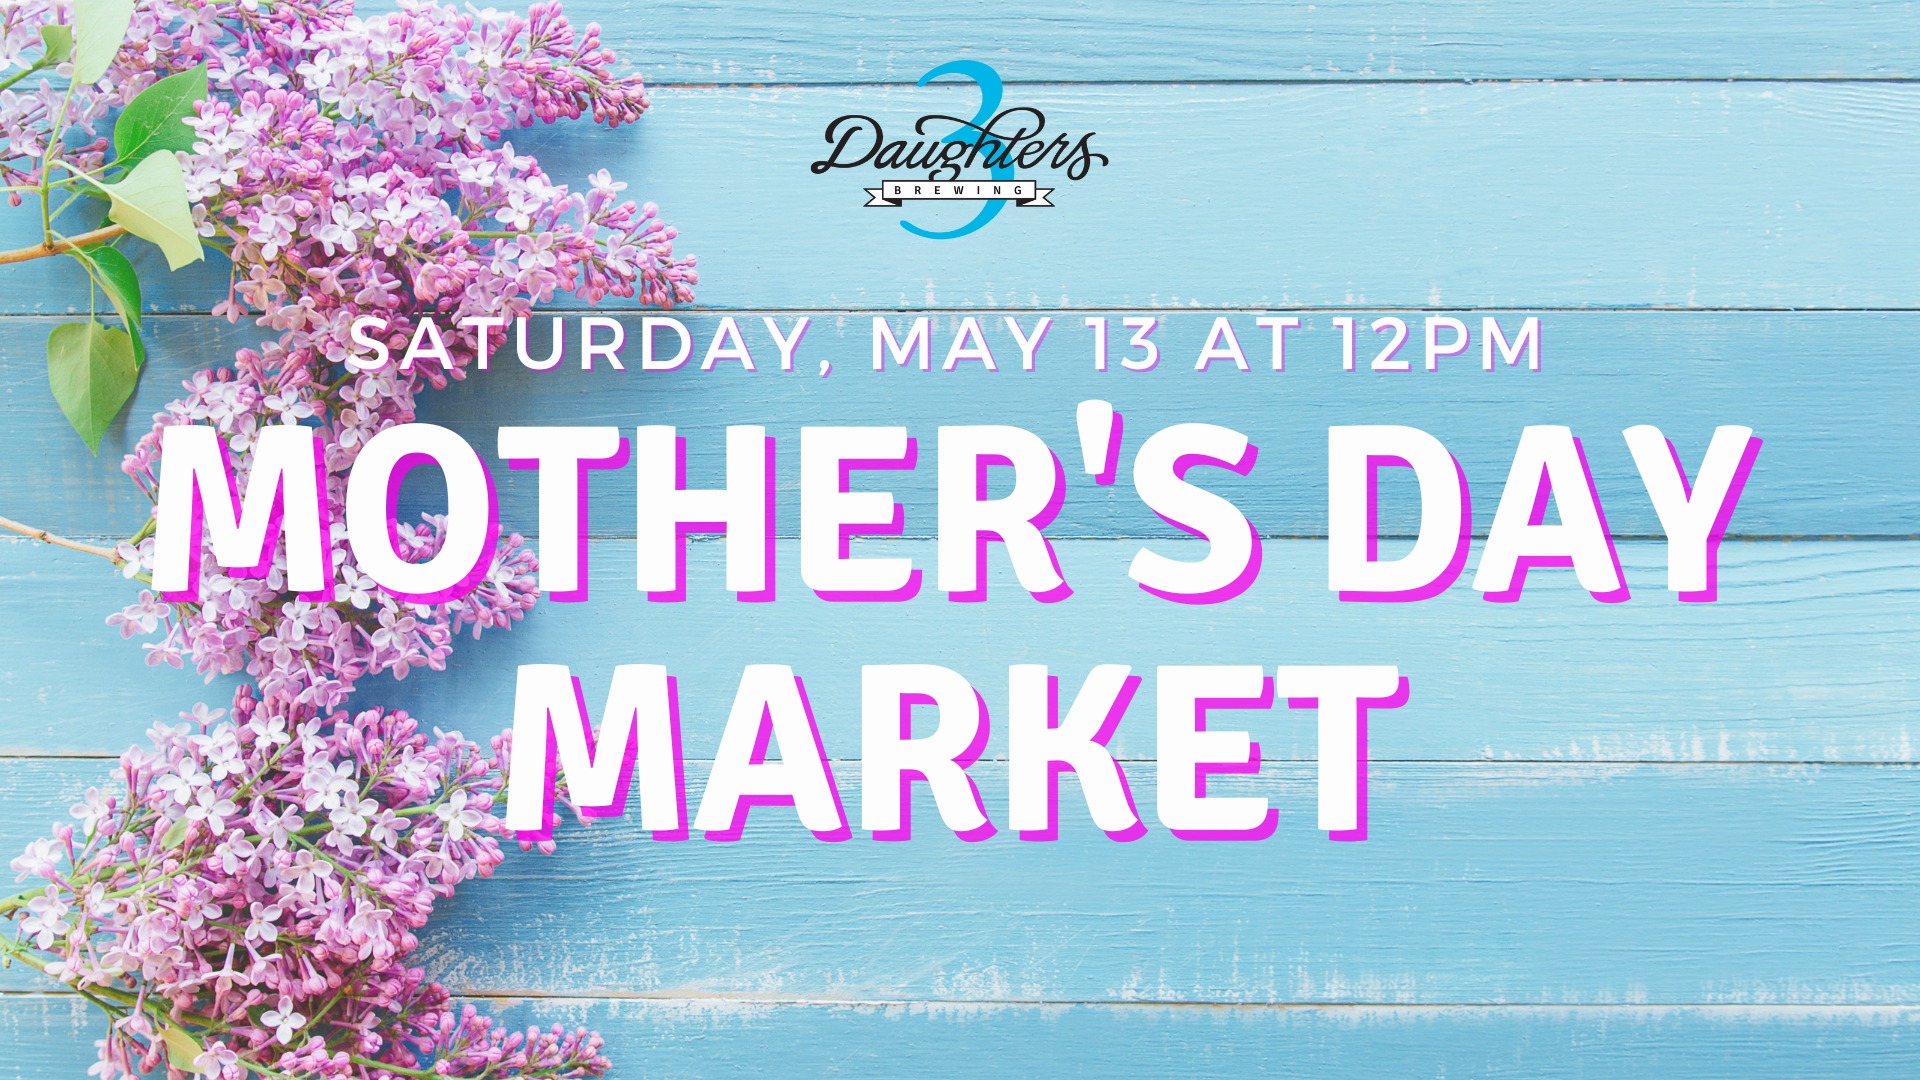 Mother’s Day Market at 3 Daughters Brewing